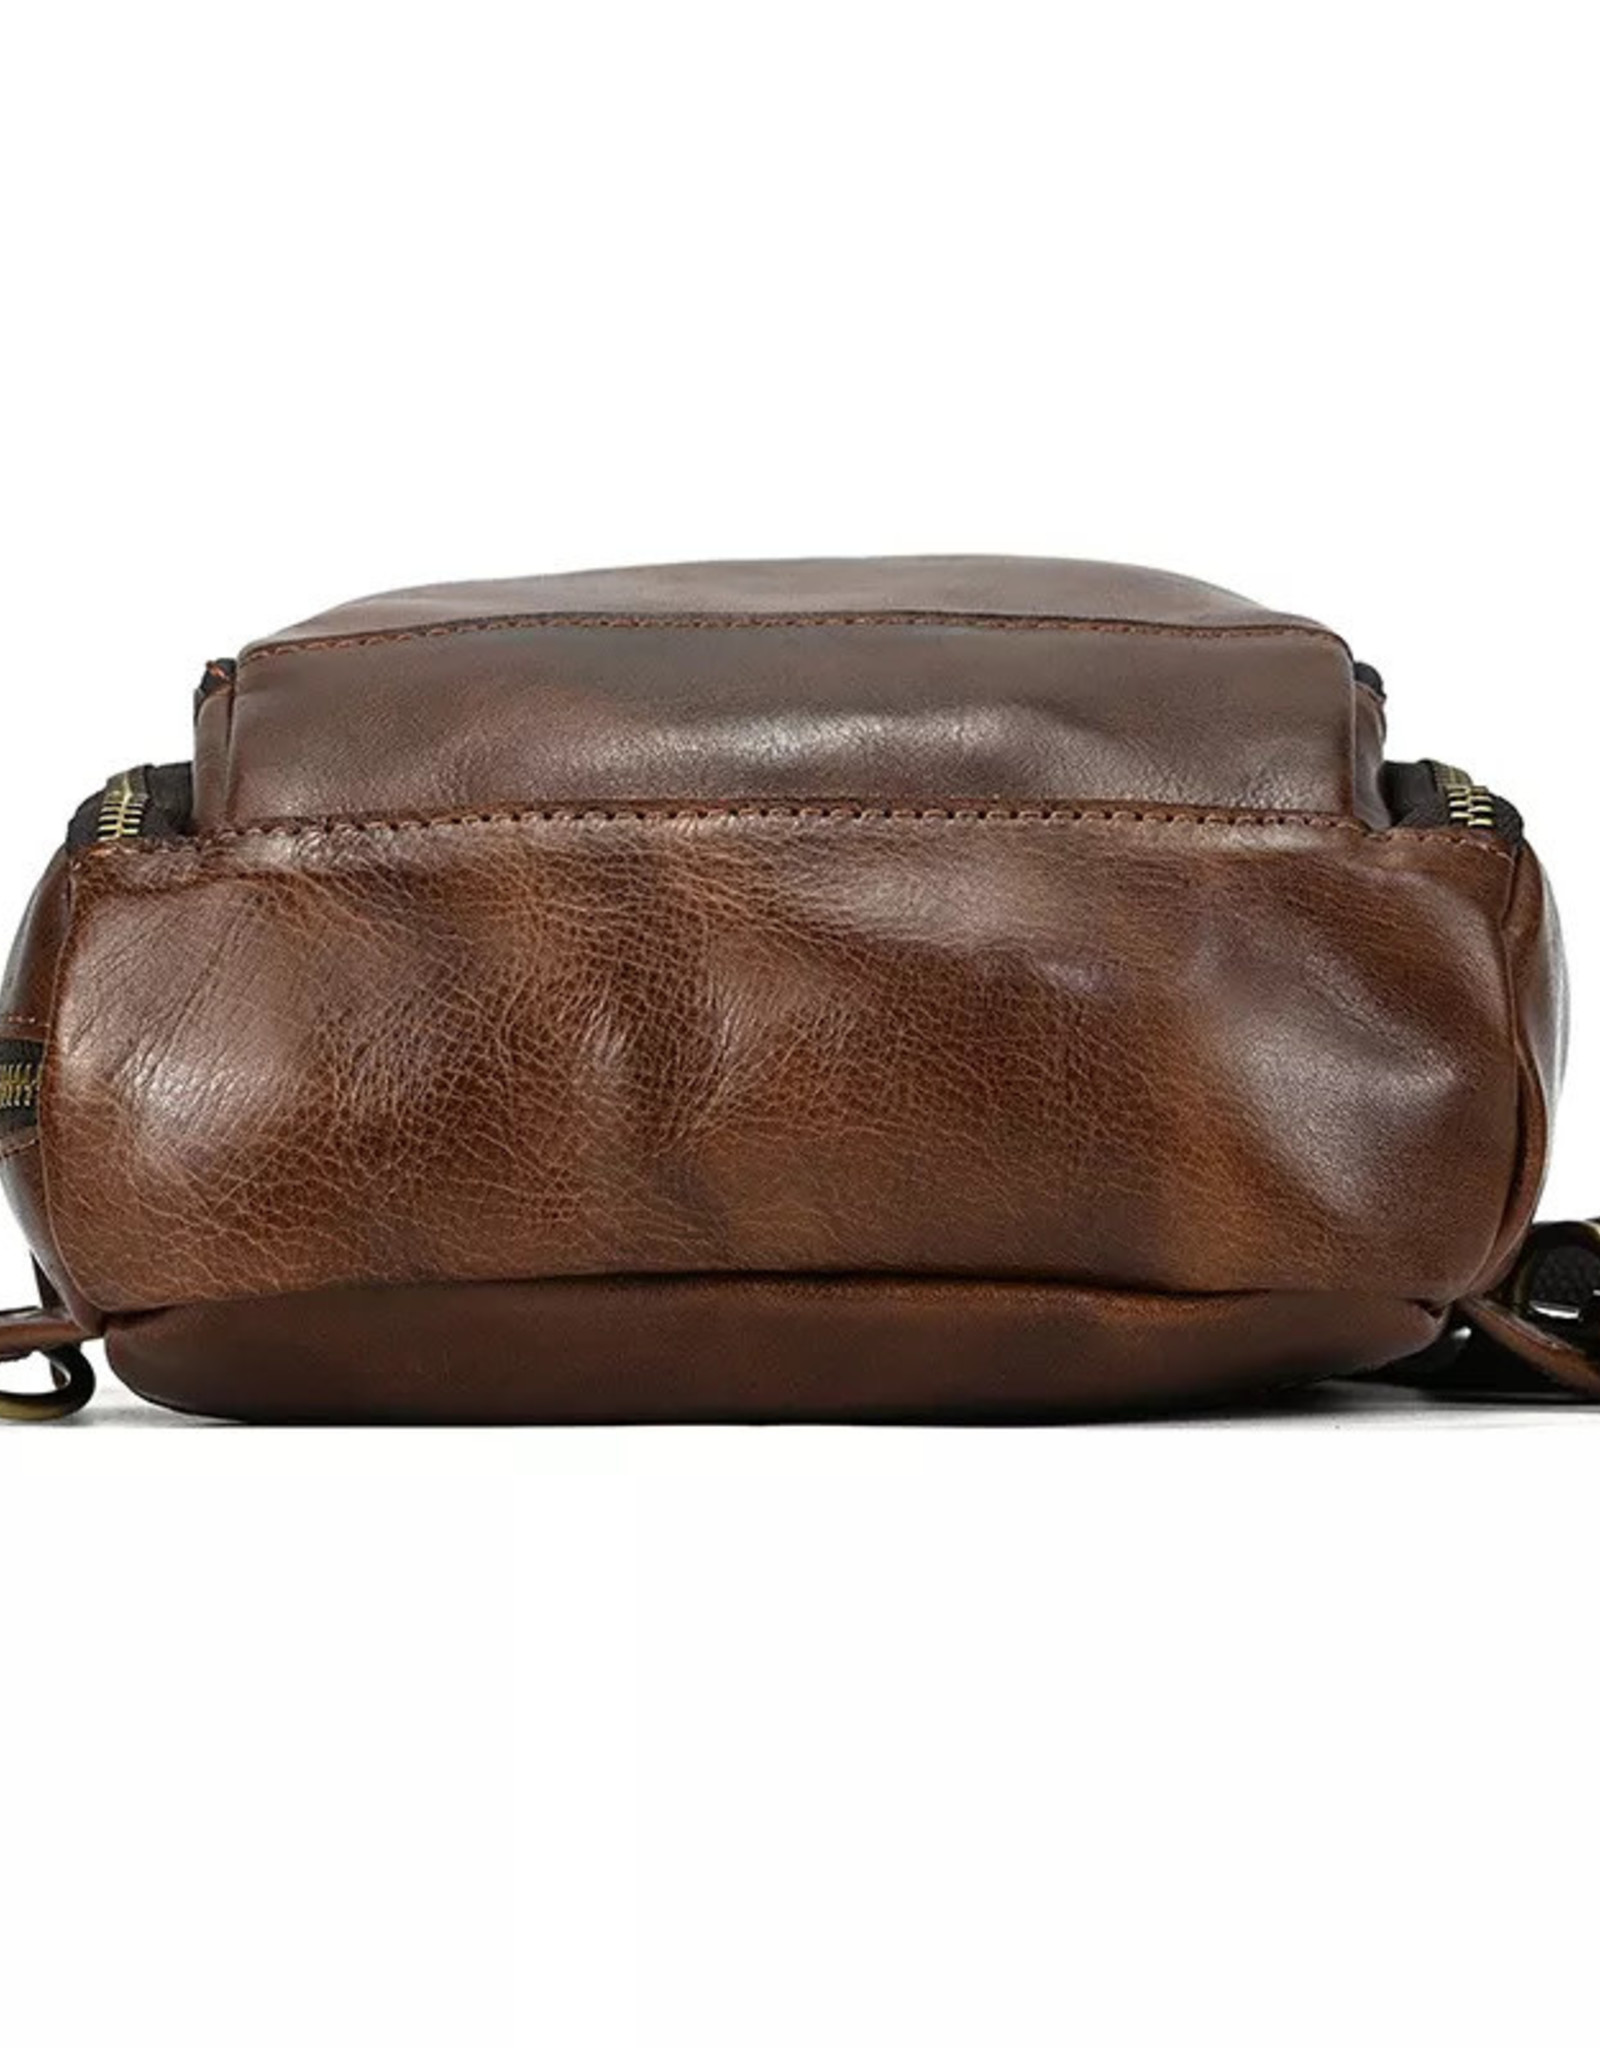 River Chest Bag Genuine Leather